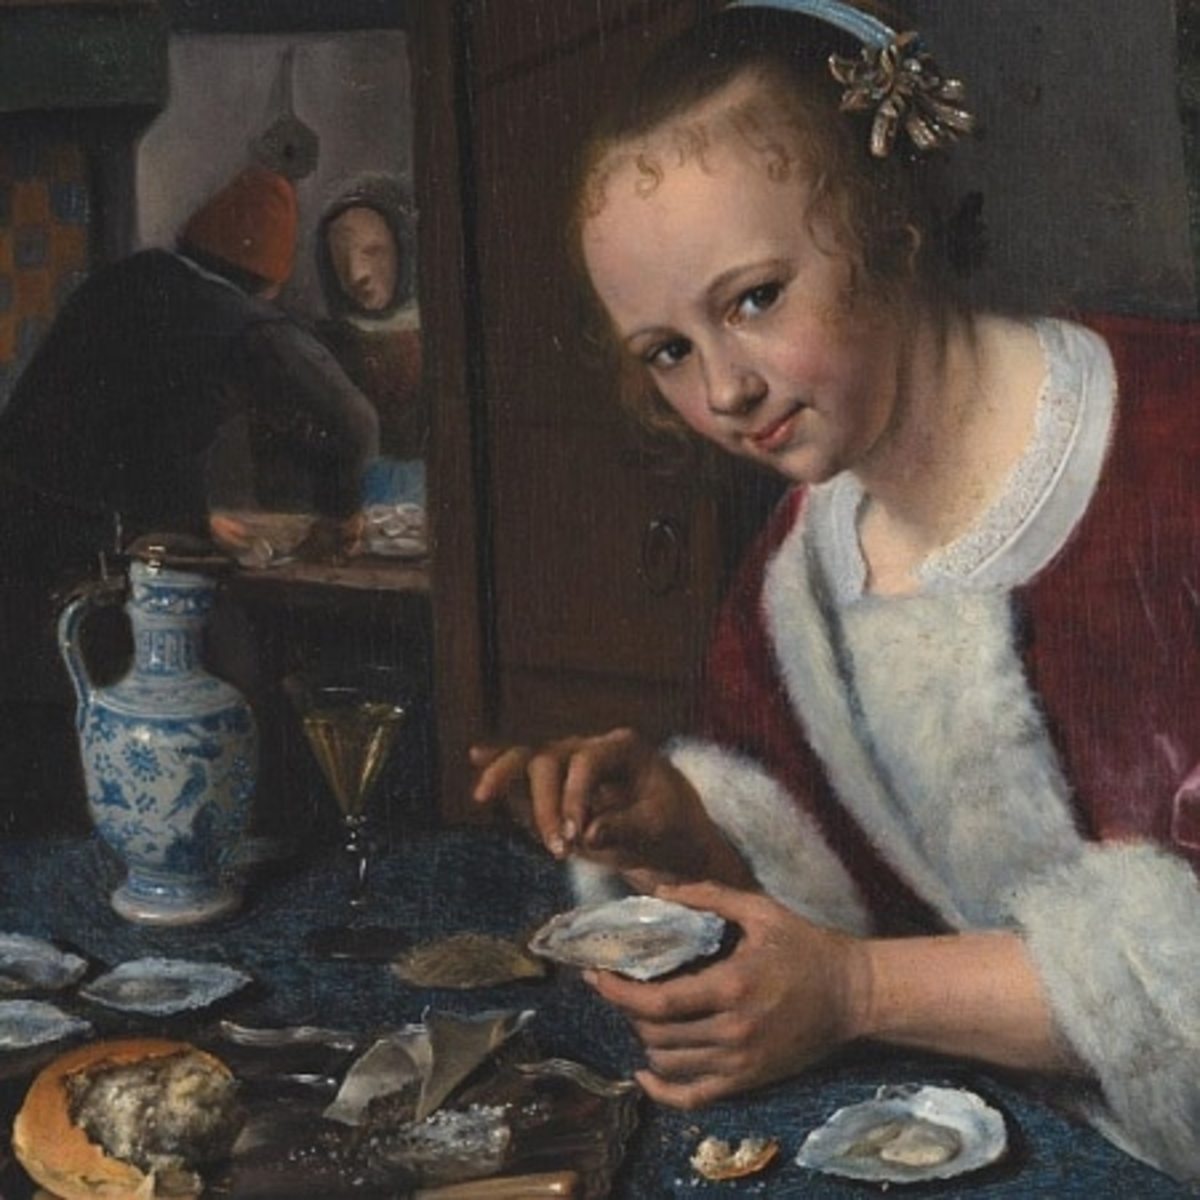 The Oyster Eater (Dutch - Het oestereetstertje)  c.1658-1660 small oil on panel painting by Jan Steen